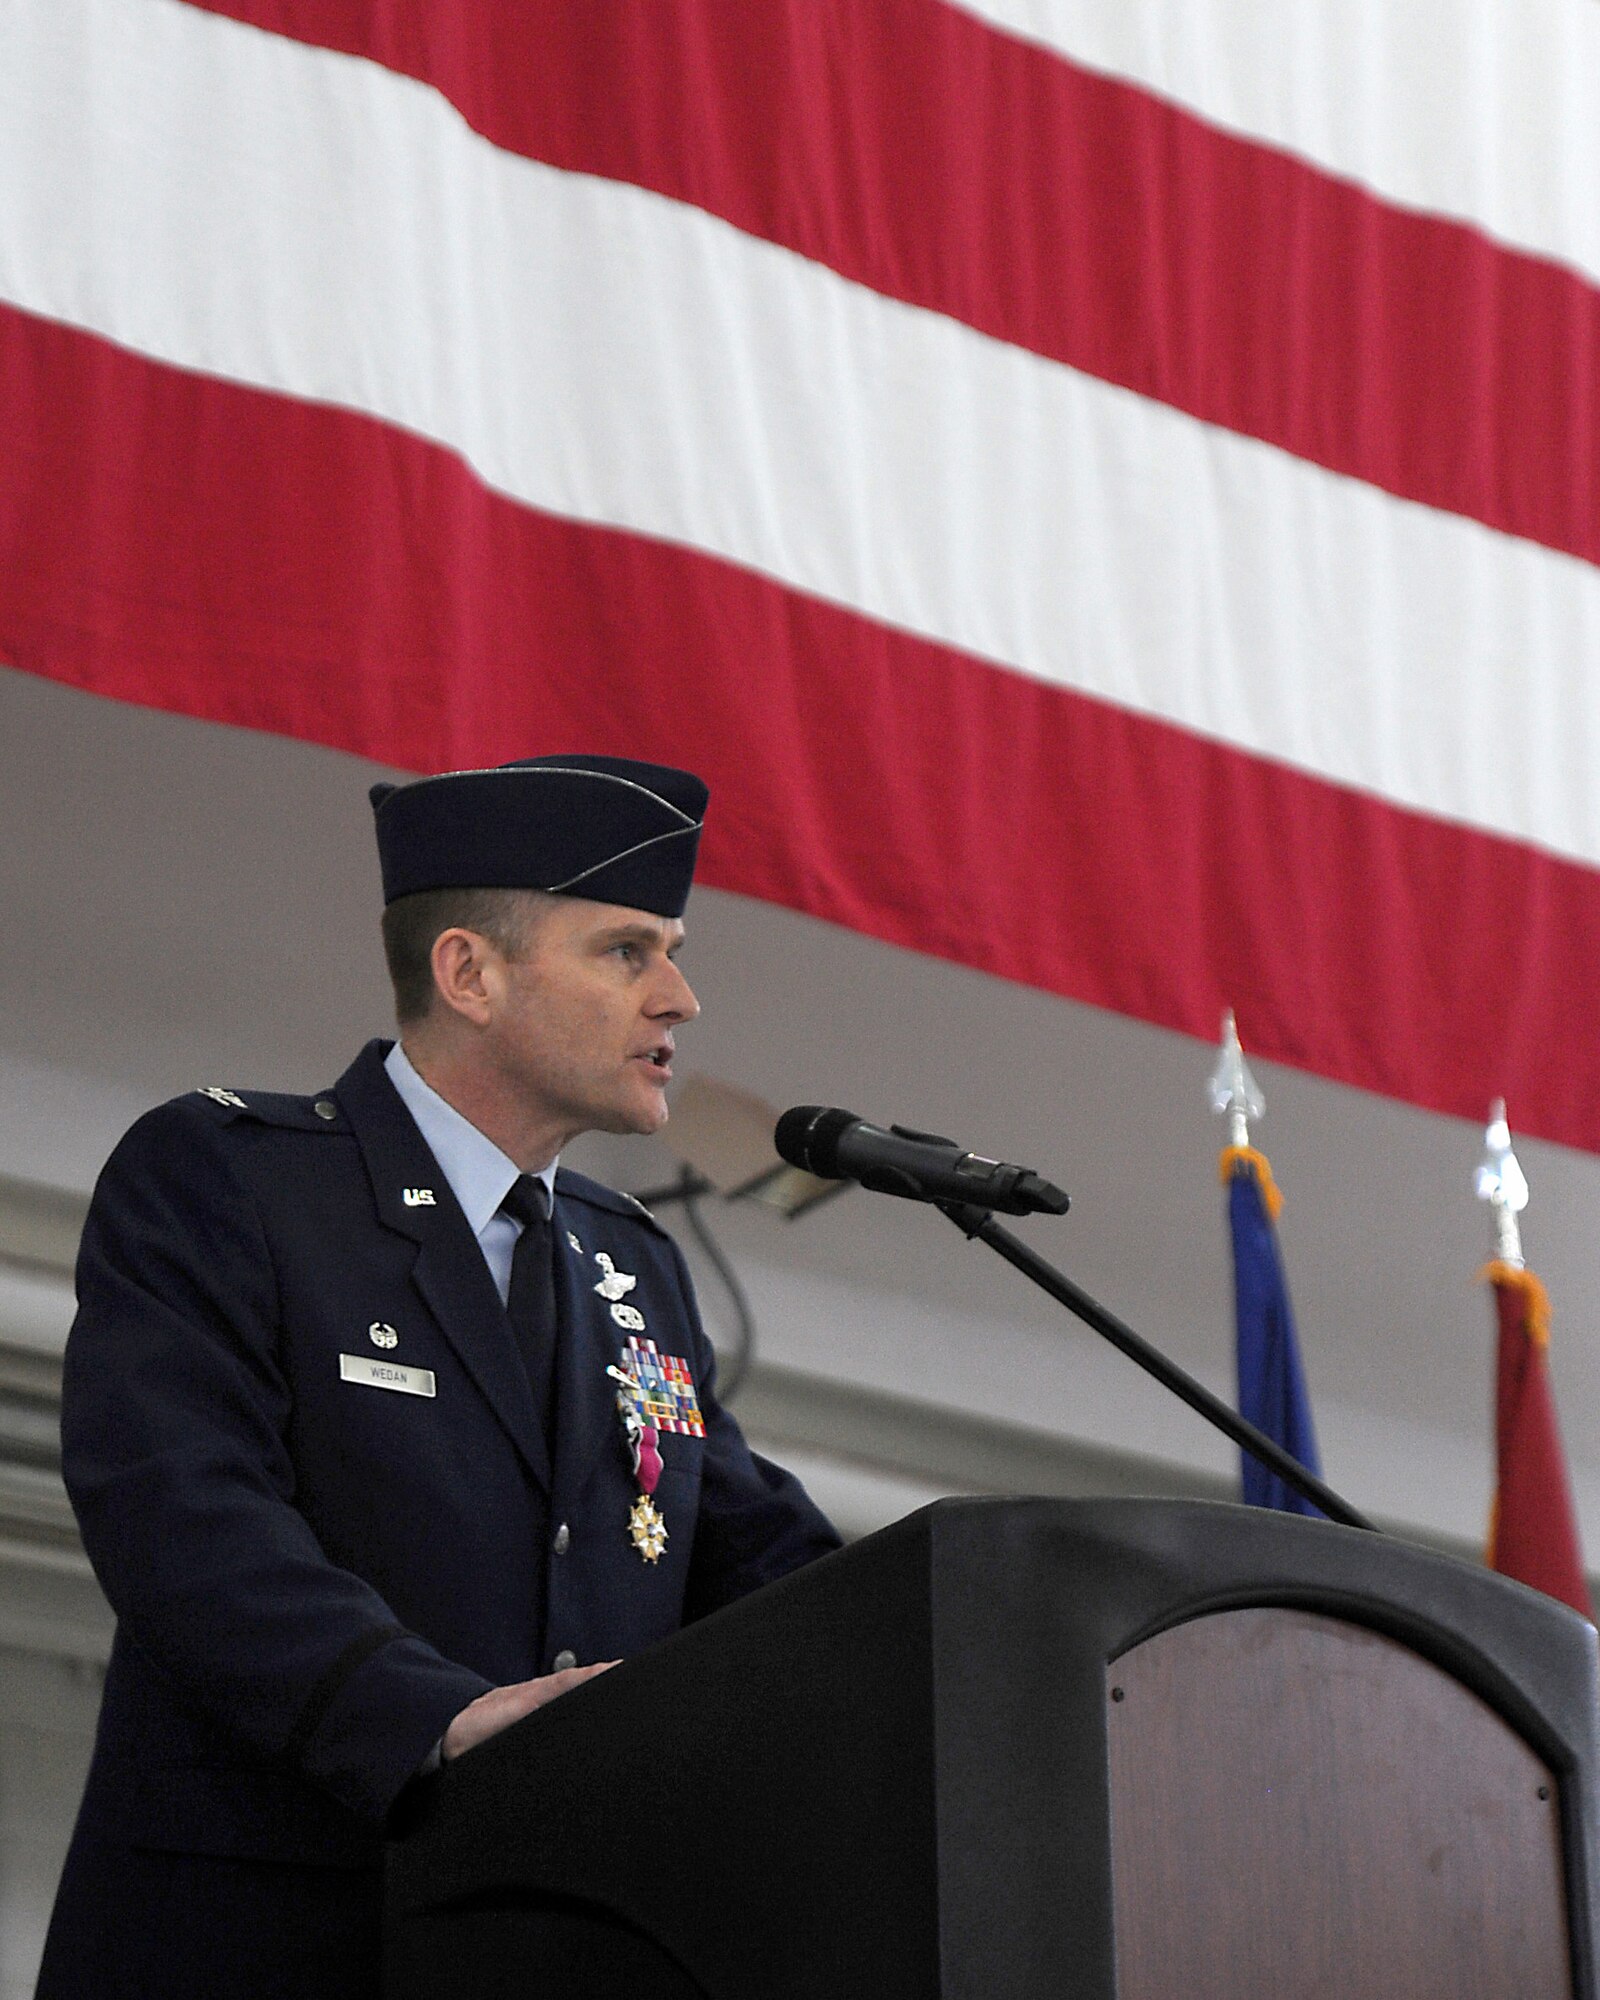 U.S. Air Force Col. Richard W. Wedan, outgoing commander 142nd Fighter Wing, Oregon Air National Guard, gives his farewell remarks as commander of the 142nd Fighter Wing to those attending the Change of Command ceremony for the wing, held at the Portland Air National Guard Base, Ore. Feb. 7, 2015. (U.S. Air National Guard photo by Staff Sgt. Brandon Boyd, 142nd Fighter Wing Public Affairs)